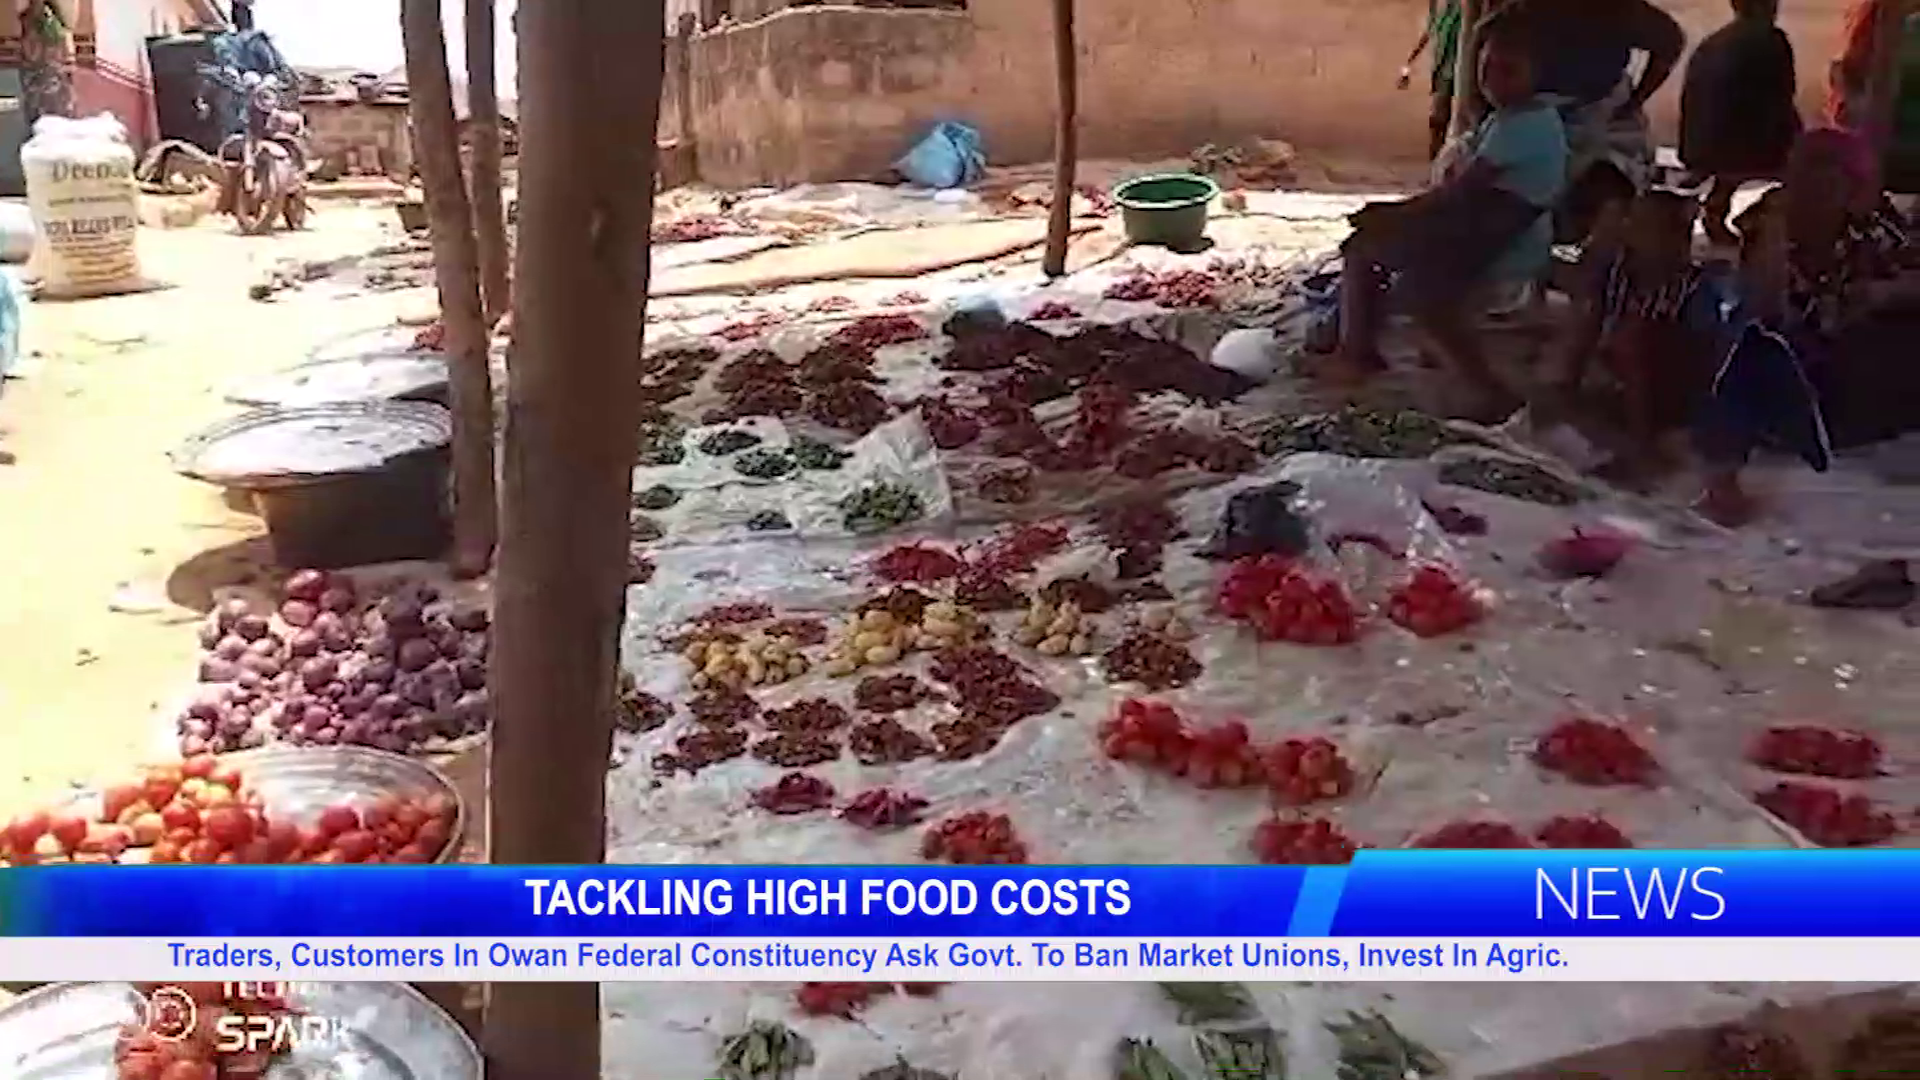 Traders, Customers In Owan Federal Constituency Ask Govt. To Ban Market Unions, Invest In Agric.